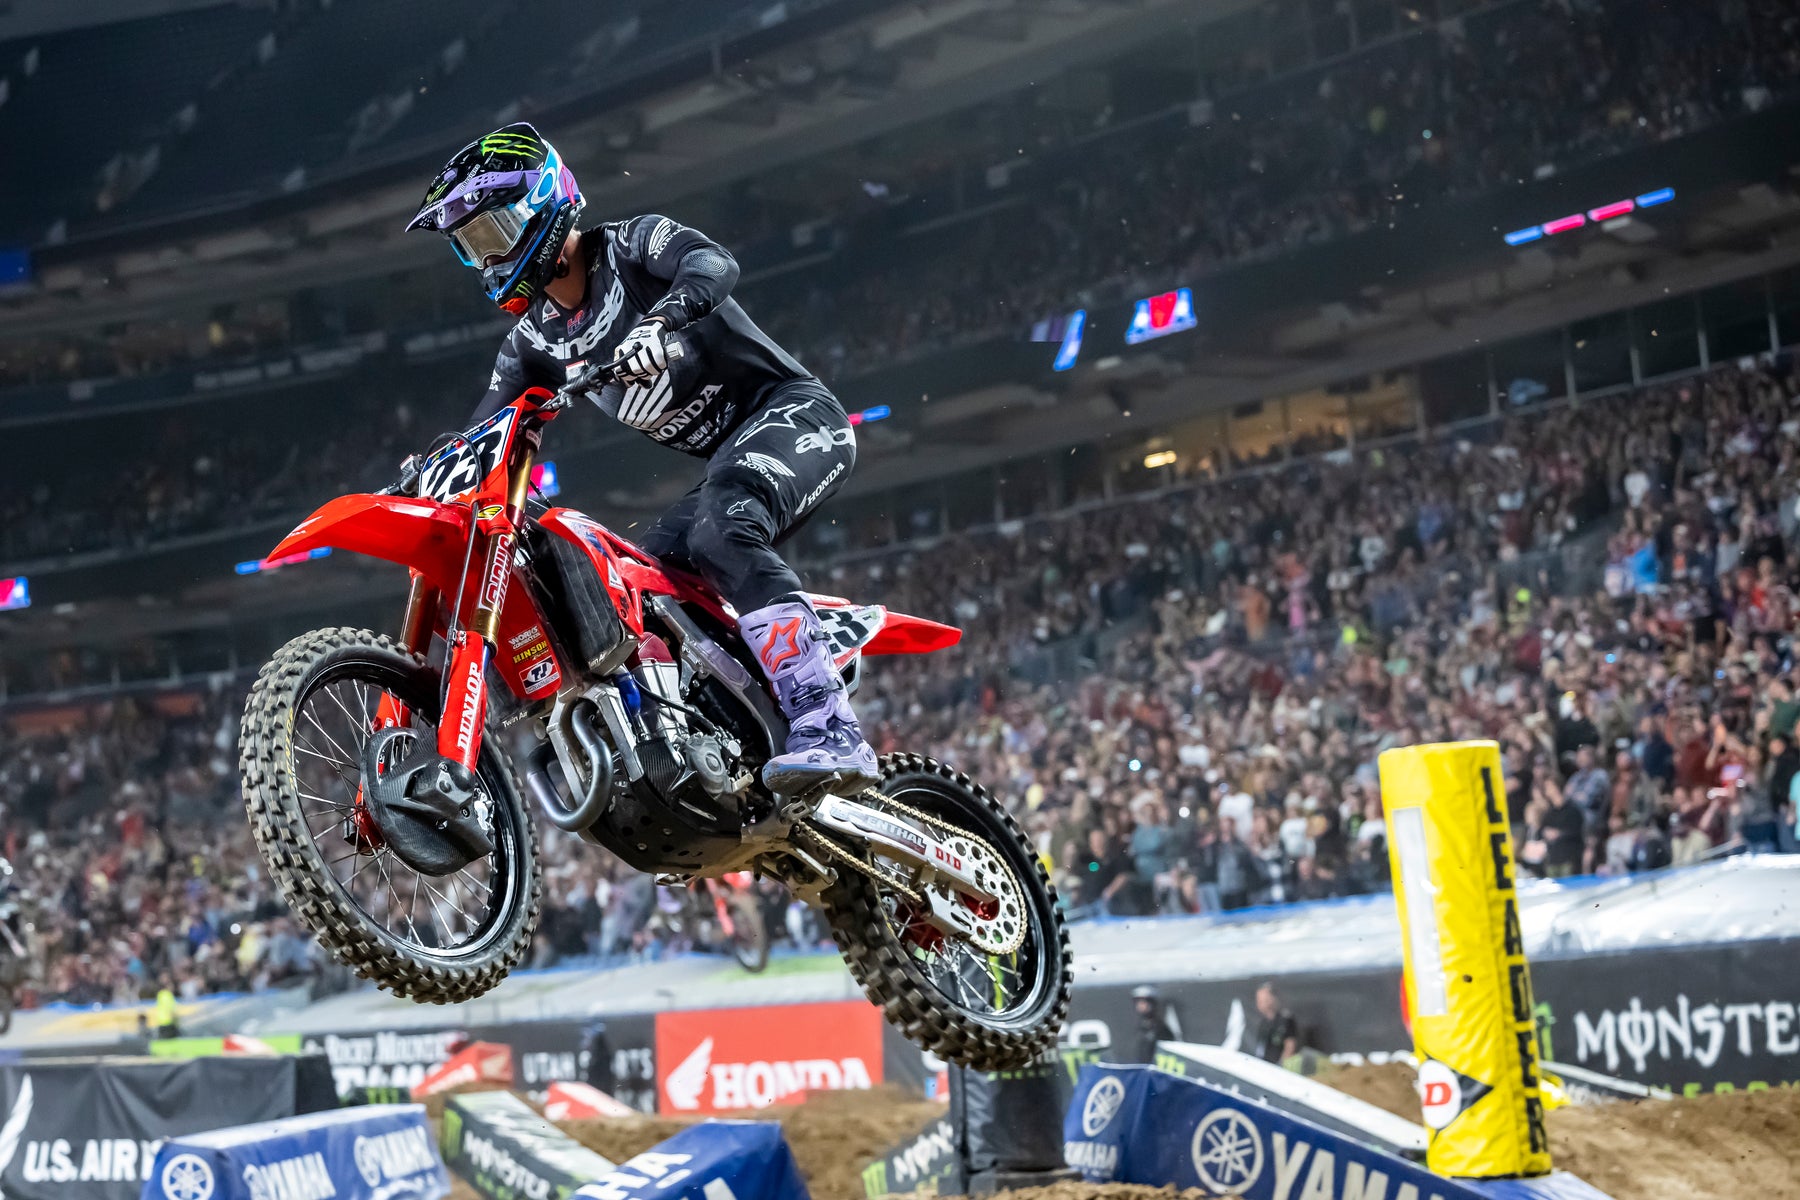 HIGH-FLYING CHASE SEXTON DELIVERS CHAMPION'S RIDE TO STORM TO 450SX VICTORY IN DENVER